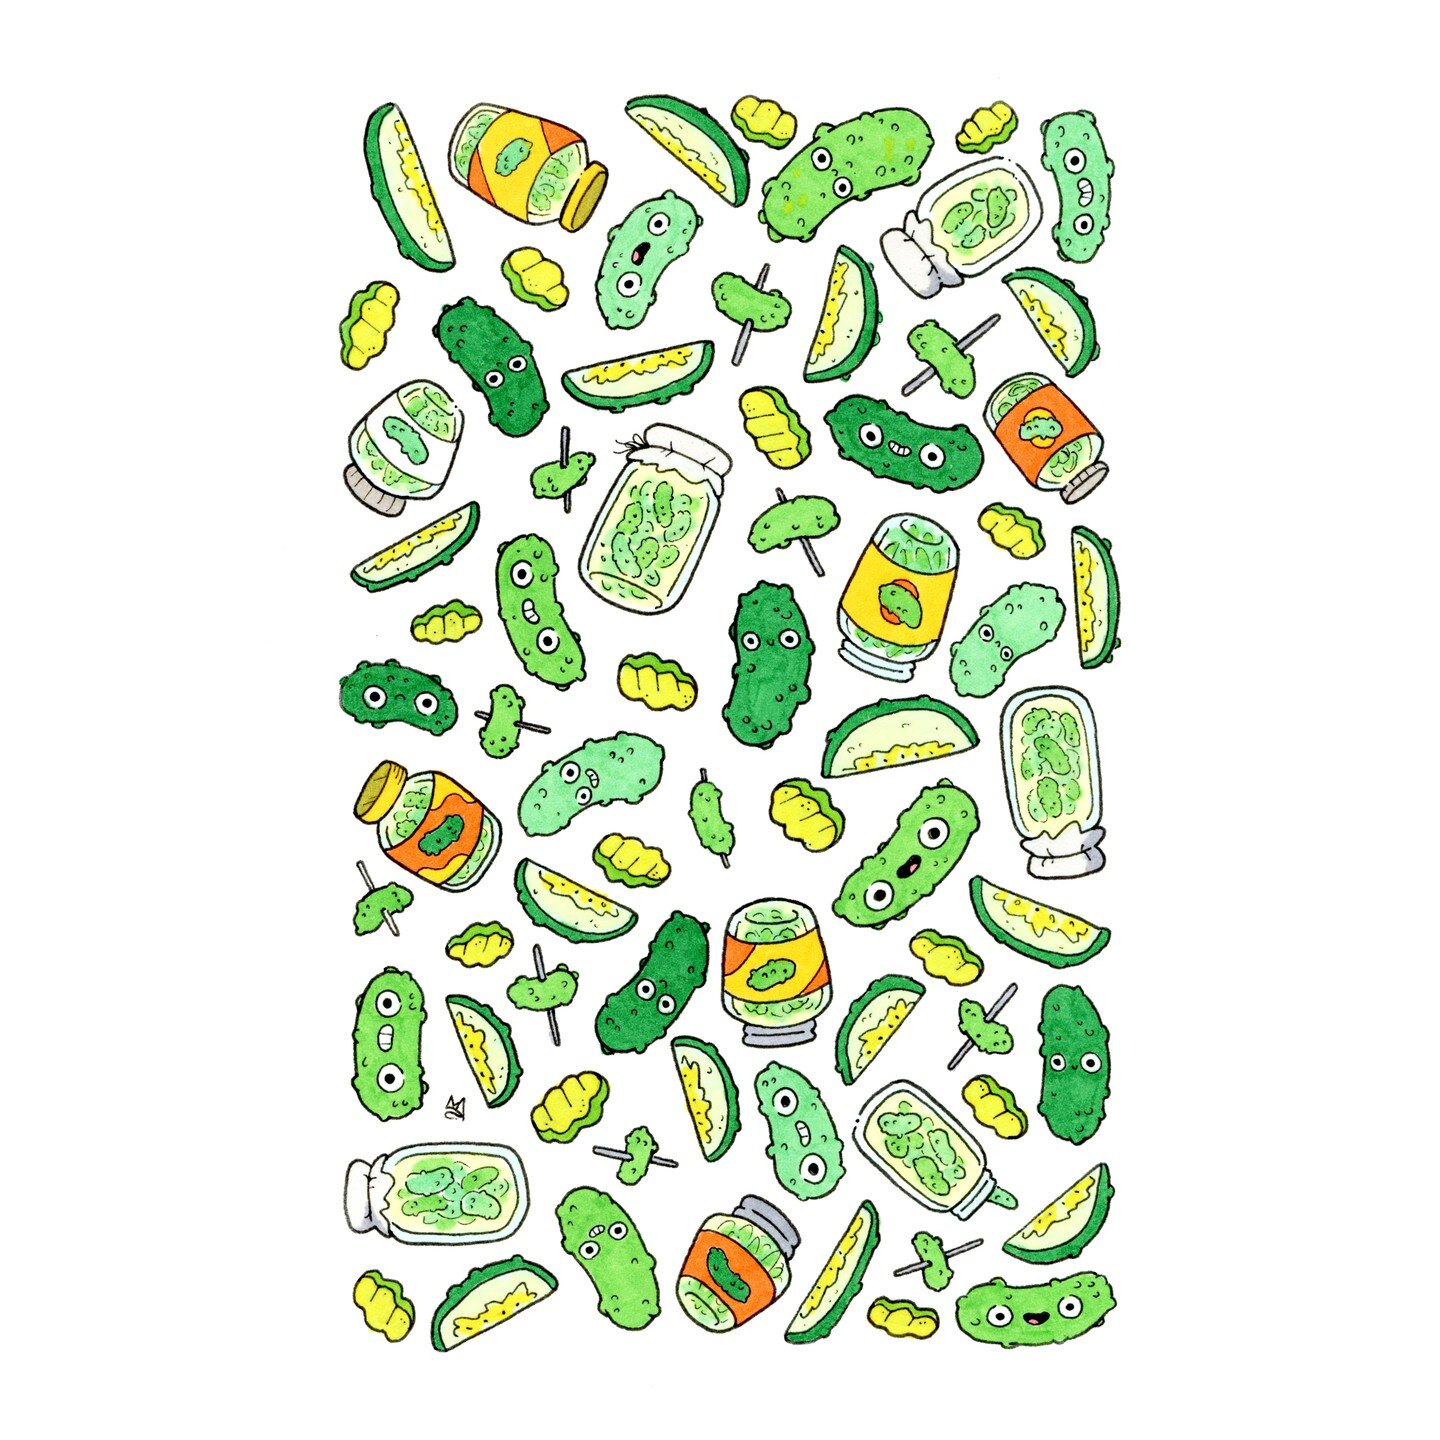 I am NOT a fan of pickles but I do have people in my life who, despite usually having good taste, are brine aficionados. This one goes out to them. 

#pickles #picklespicklespickles #pattern #artworkoftheday #artwork #cutepickles